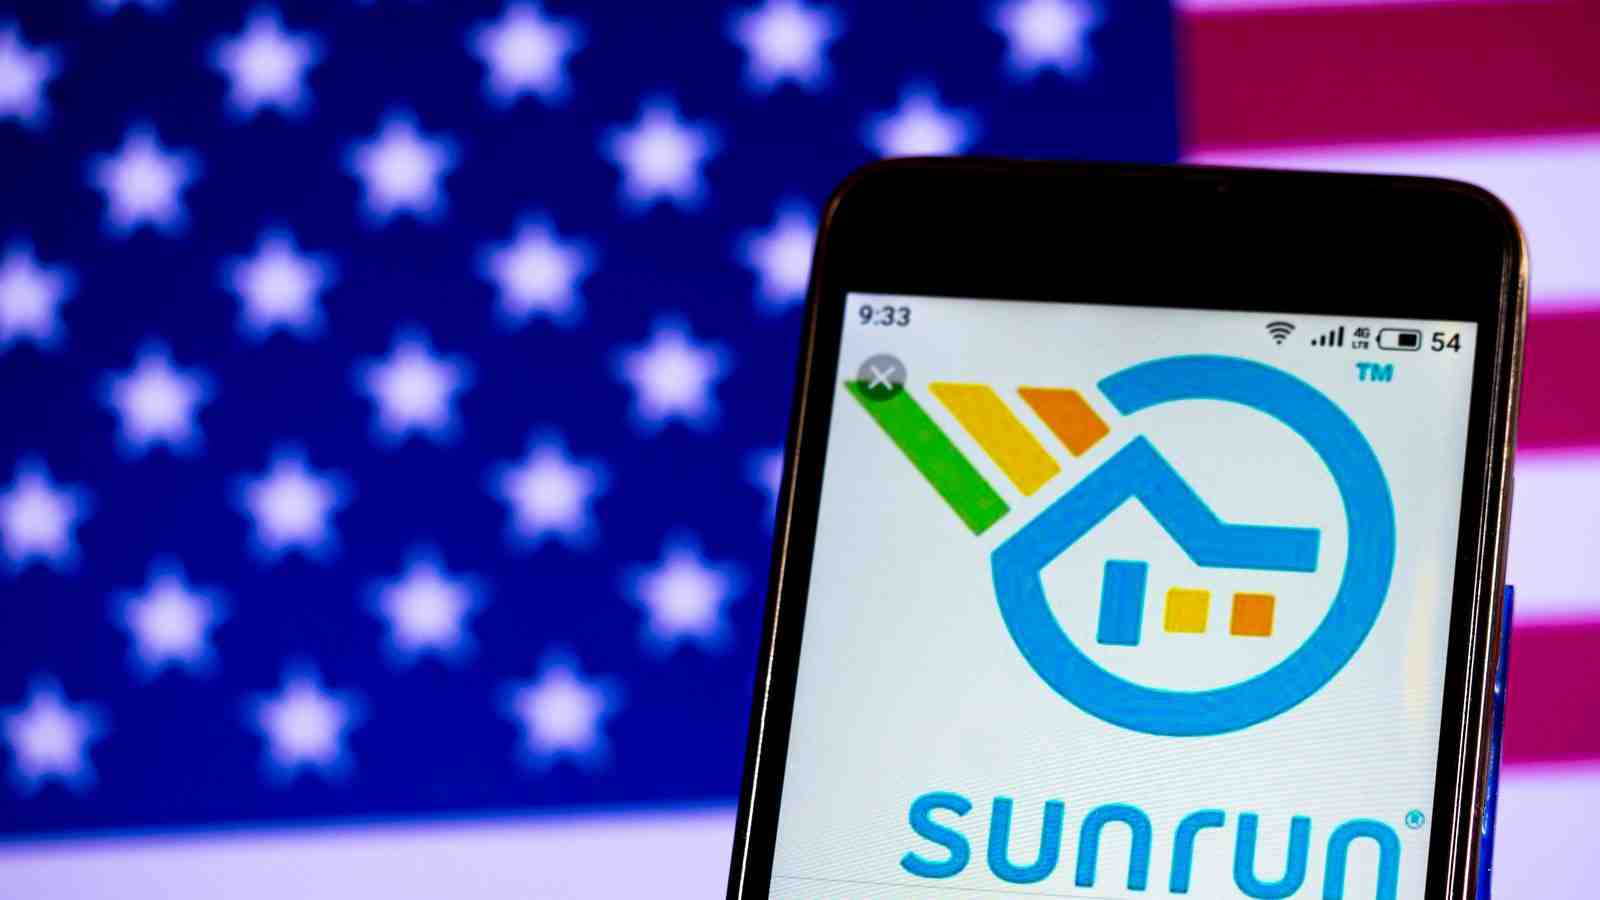 Who did Sunrun merger with?